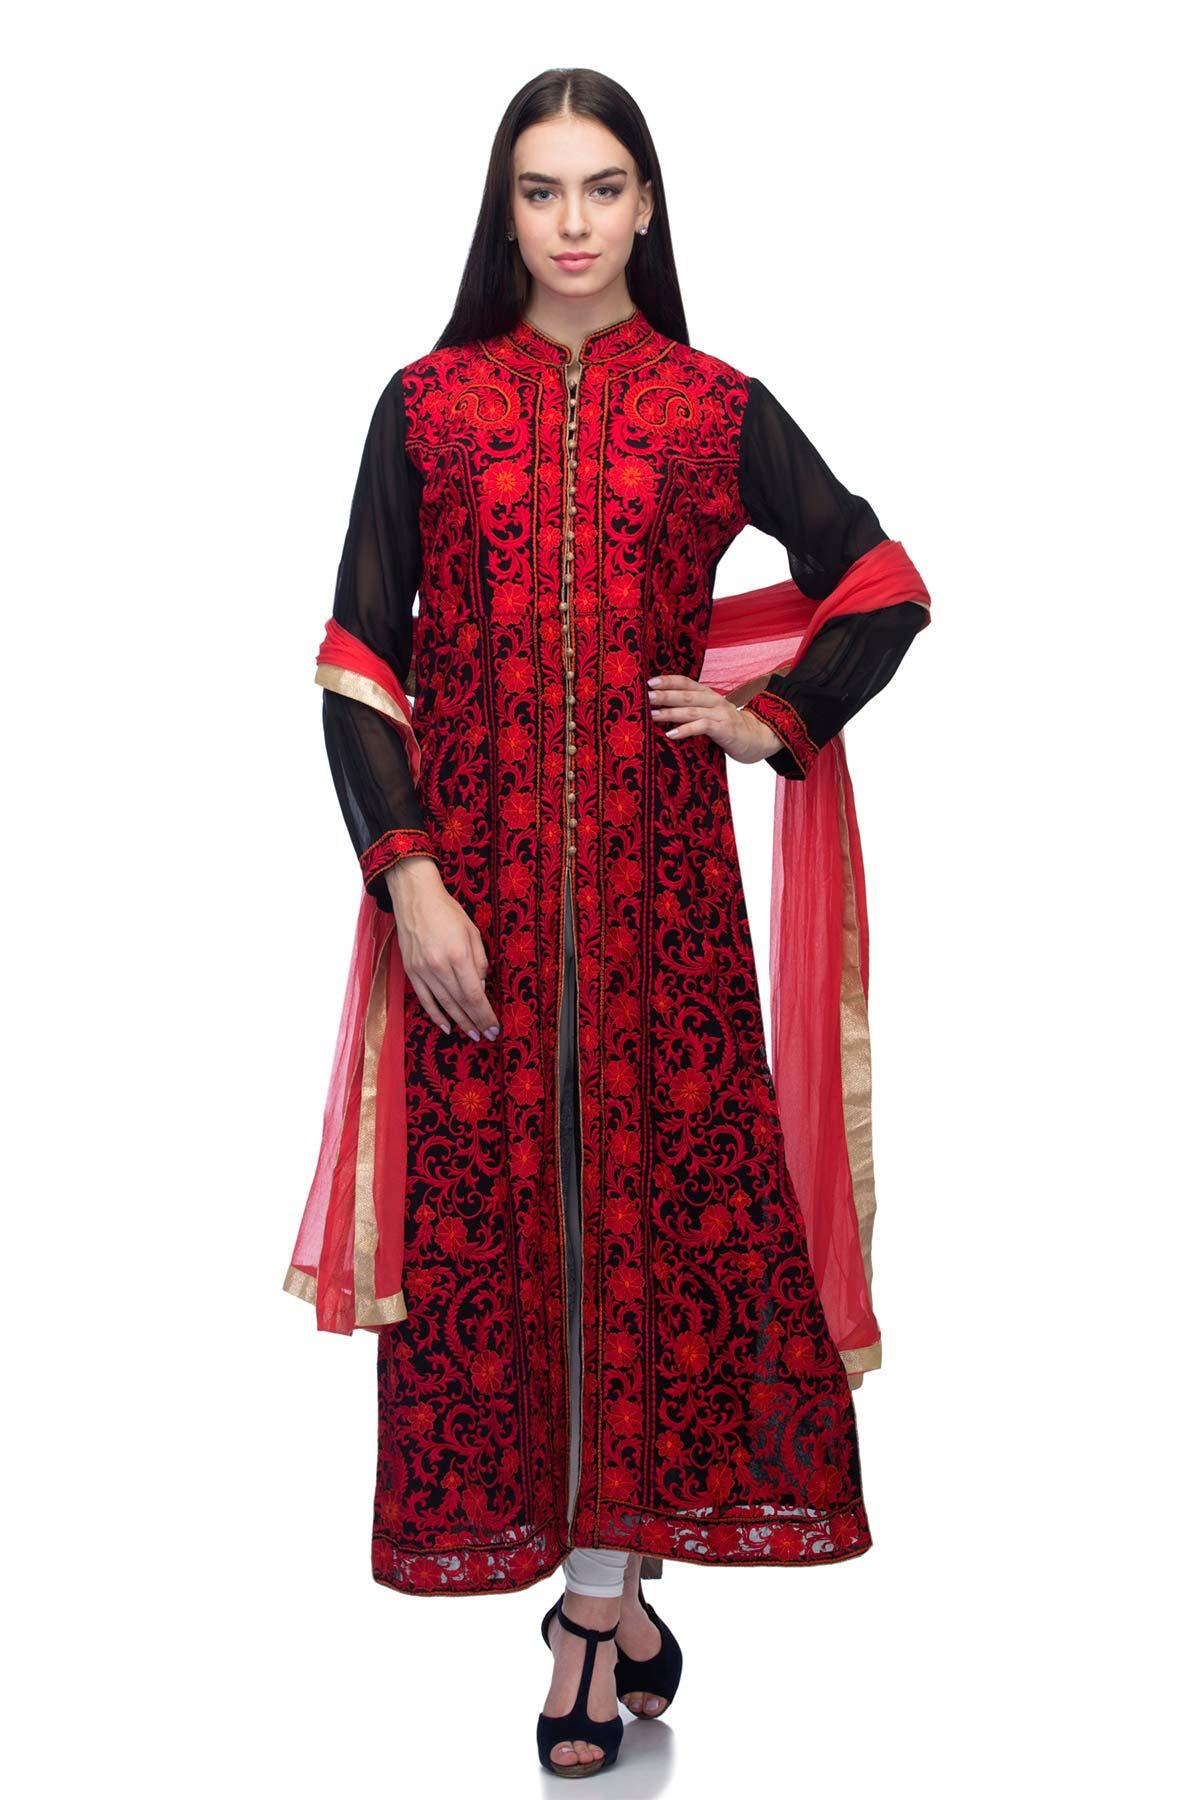 TEEMOODS Three Fourth Sleeves Red Kurti in Phagwara - Dealers,  Manufacturers & Suppliers - Justdial